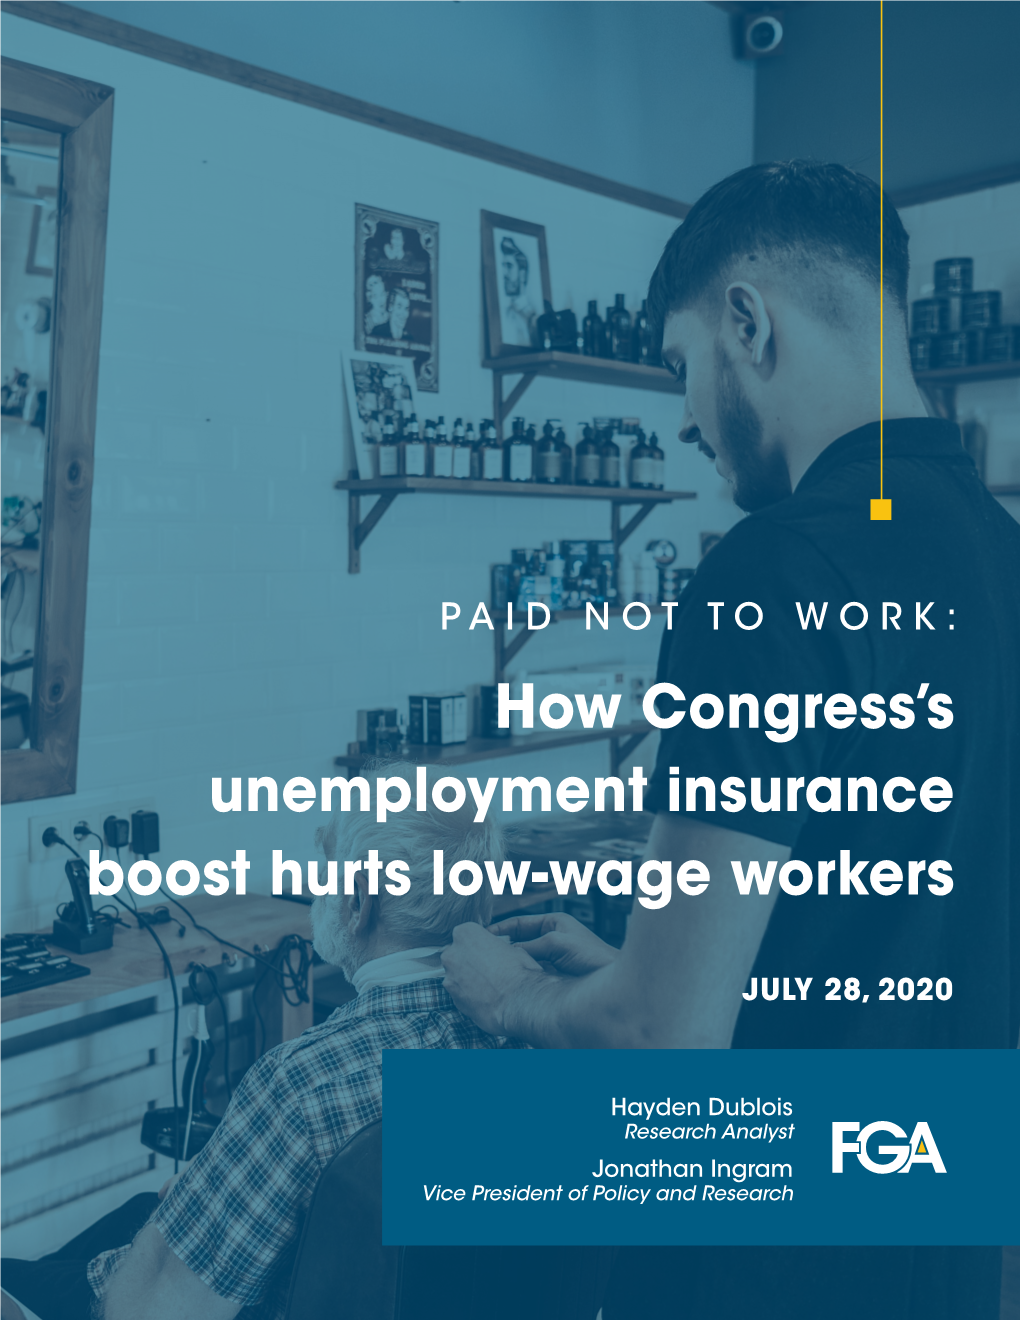 How Congress's Unemployment Insurance Boost Hurts Low-Wage